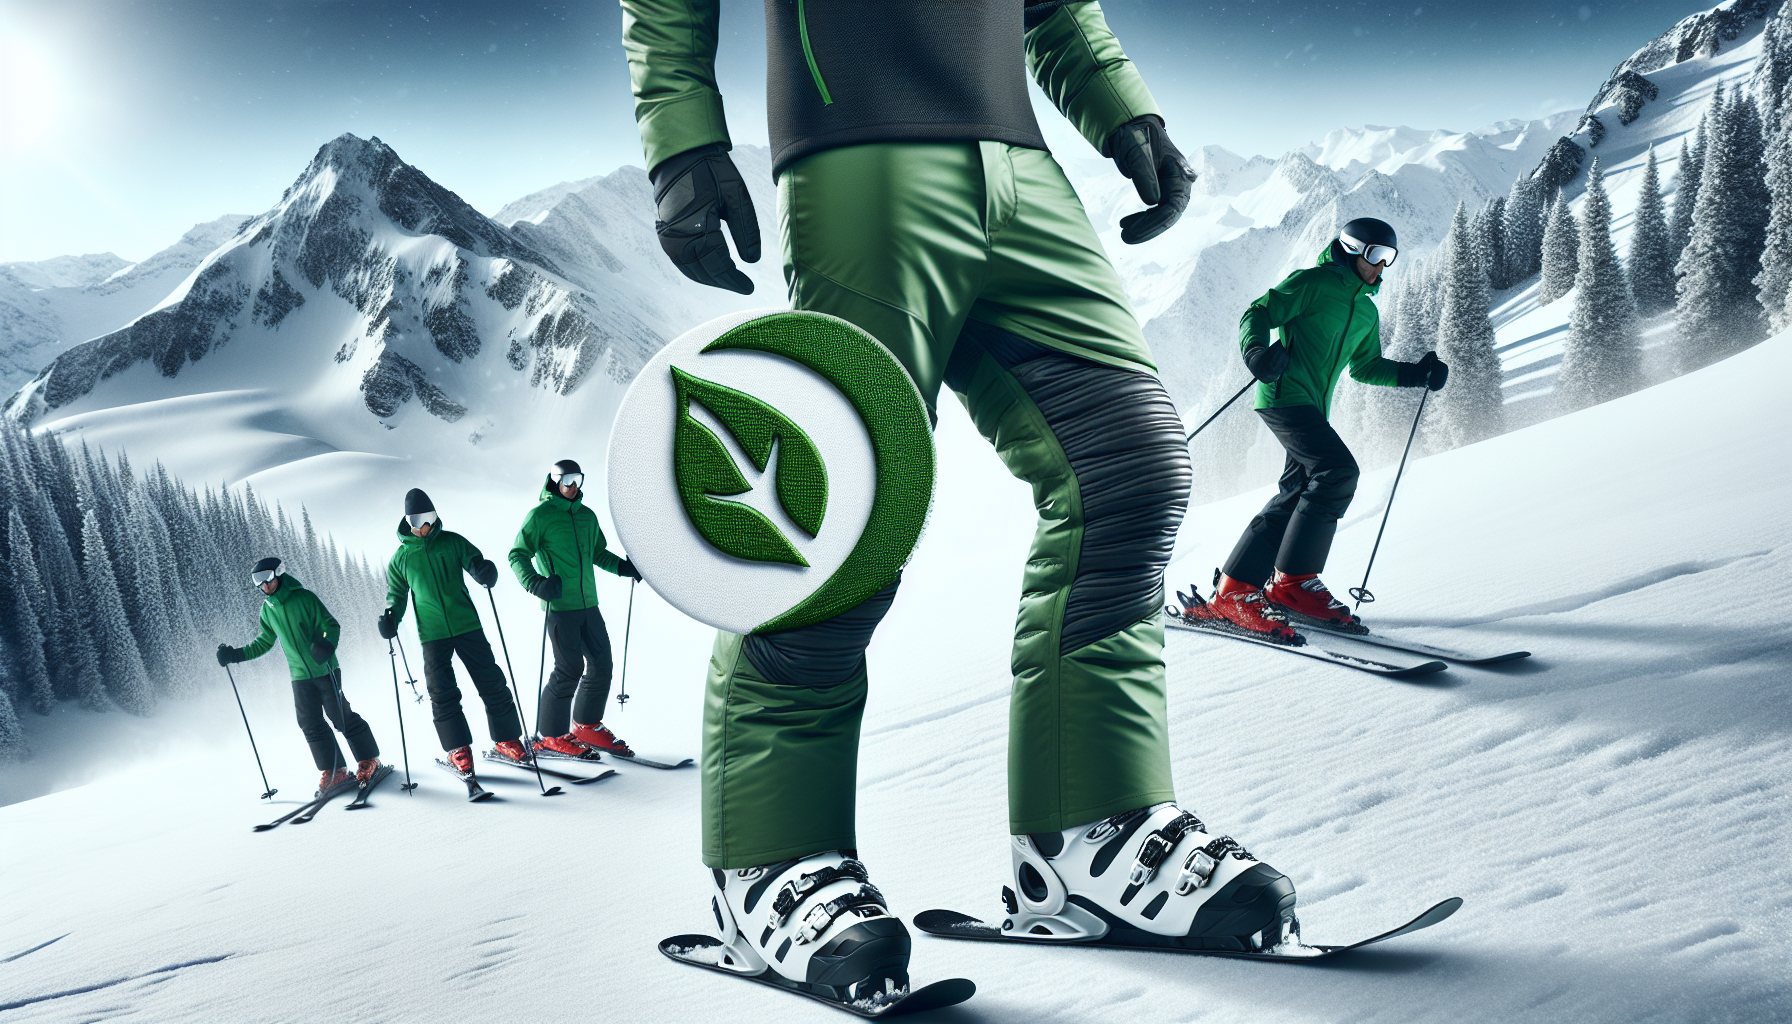 REI Co-op Powderbound Insulated Snow Pants for eco-conscious skiers